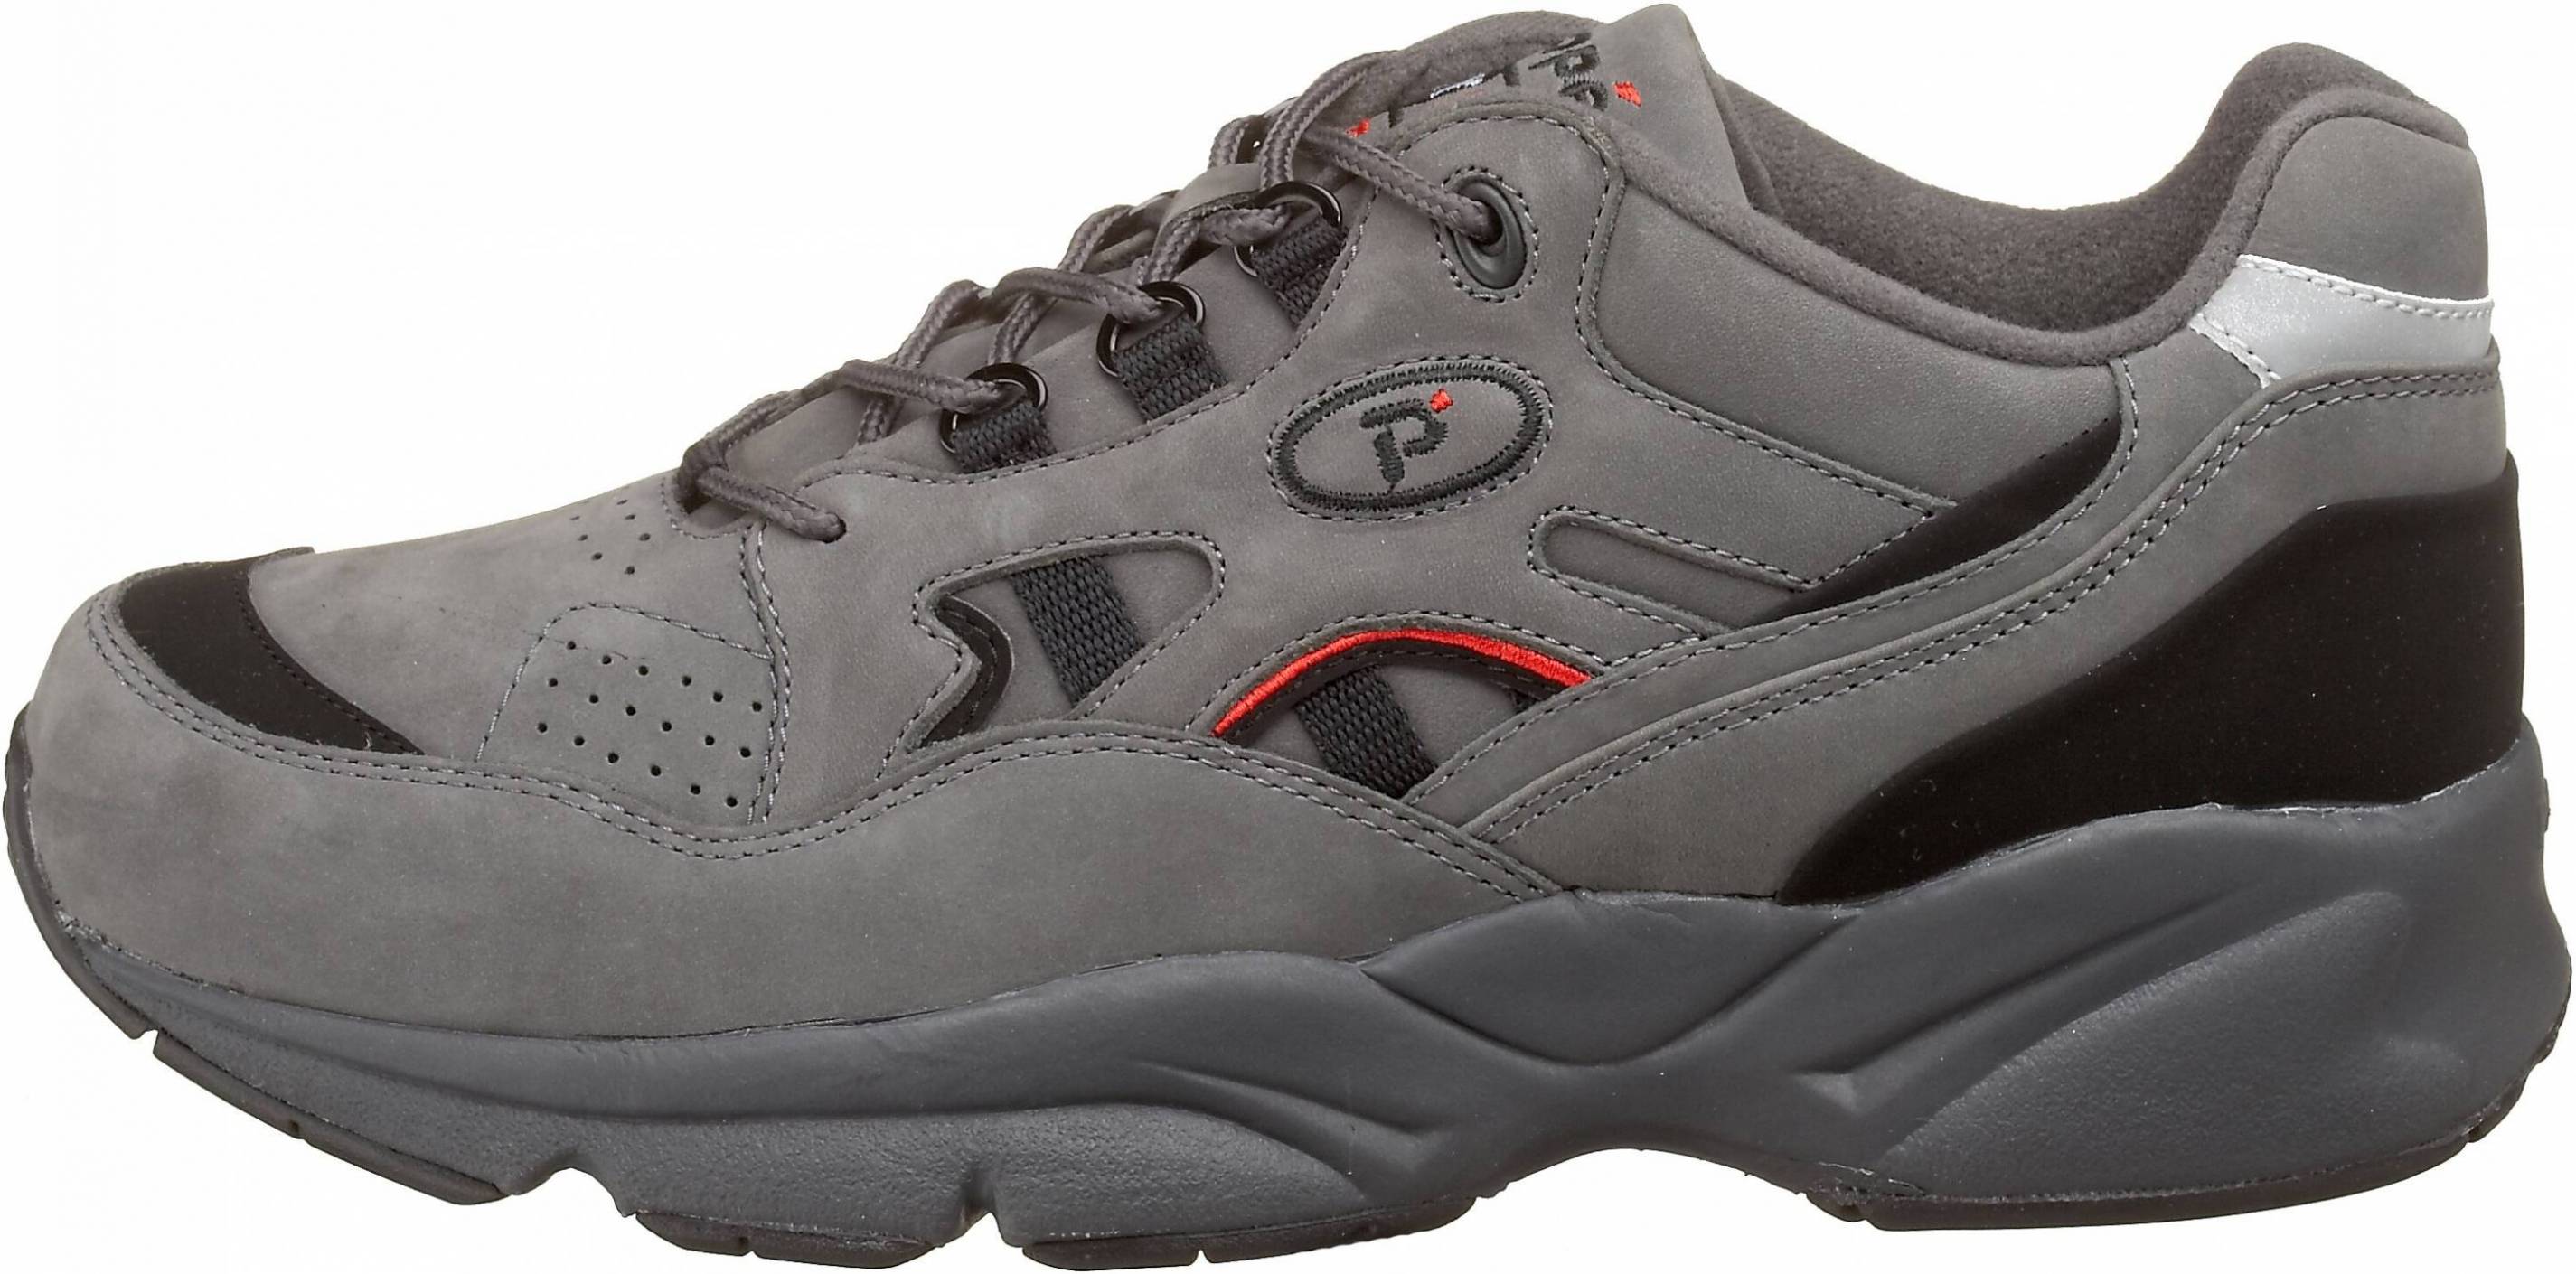 Save 59% on Propet Walking Shoes (15 